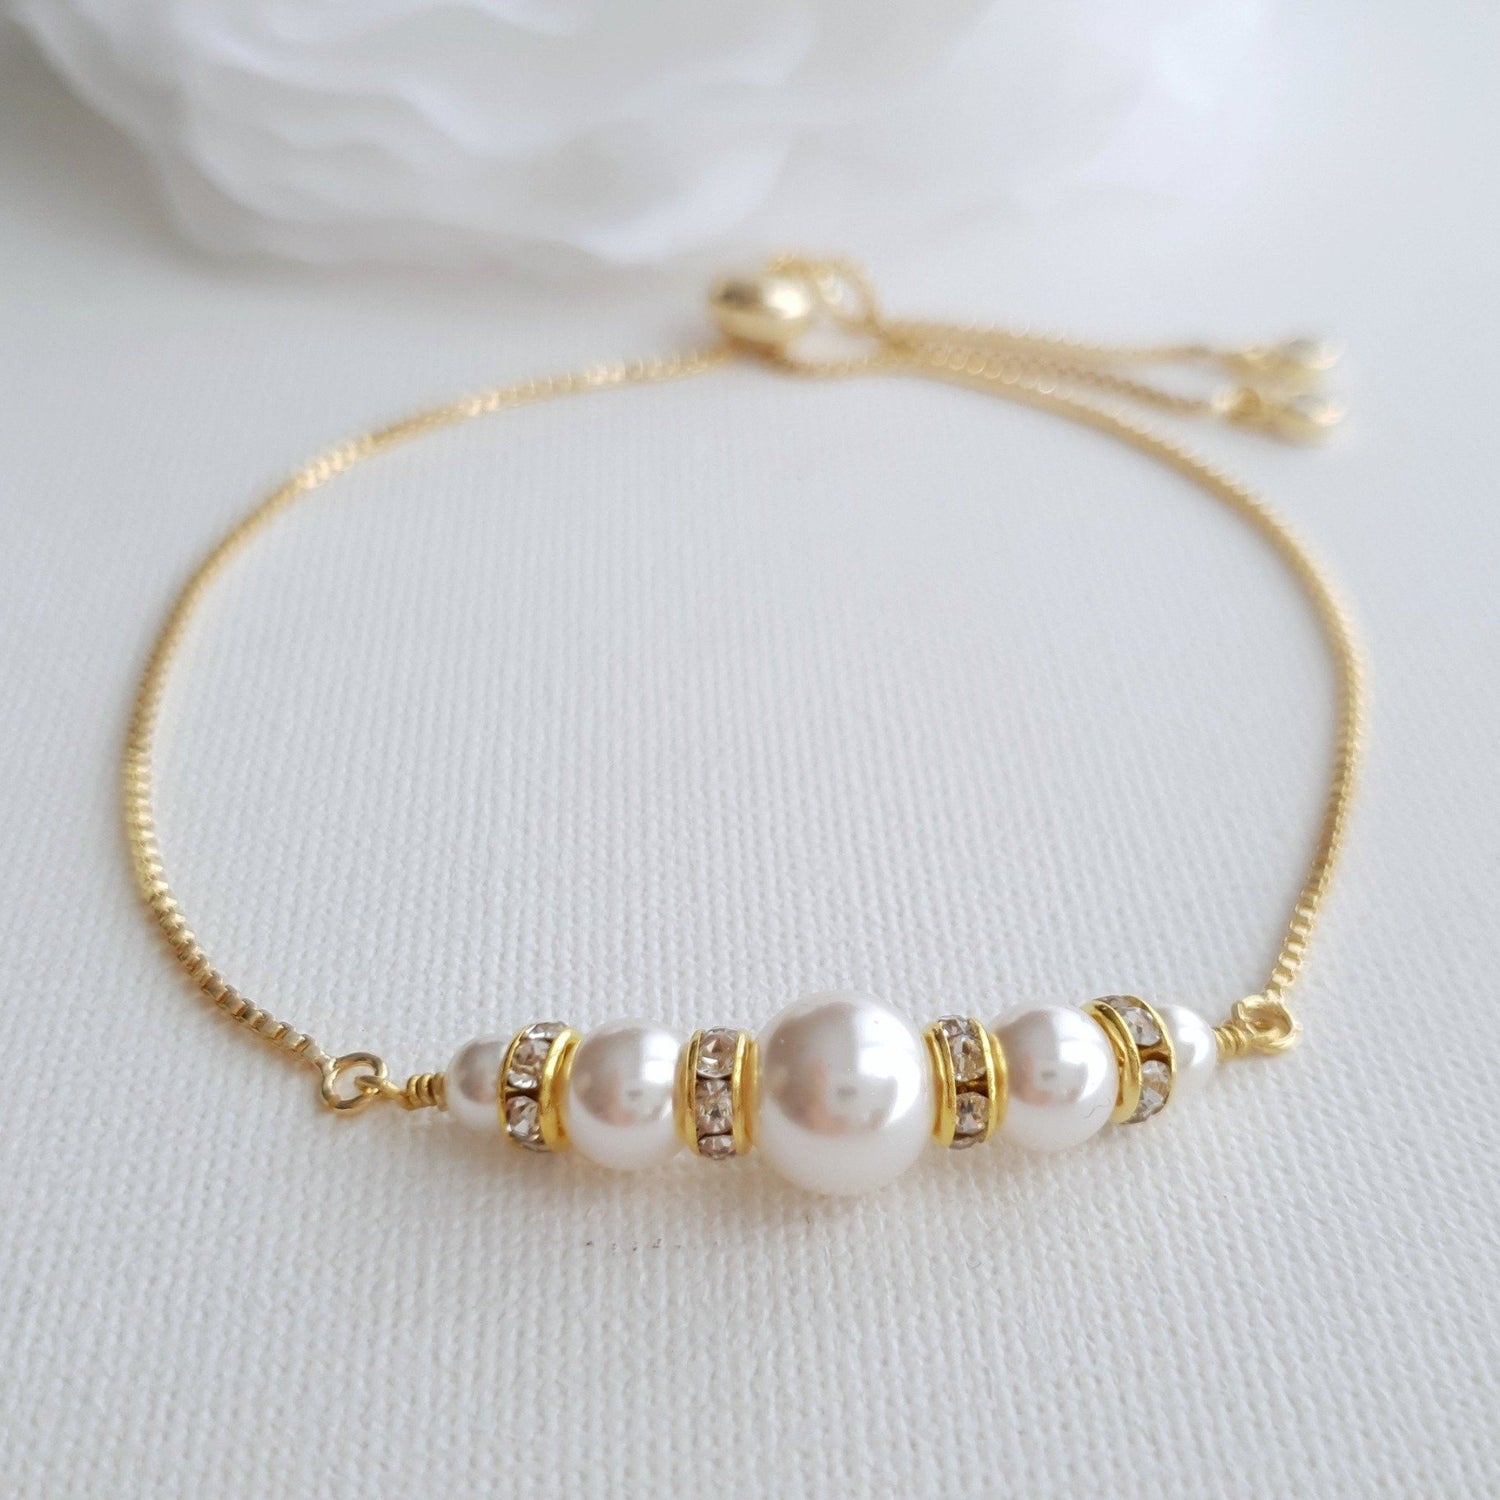 Gold and Pearl Bracelet With Sliders & Adjustable